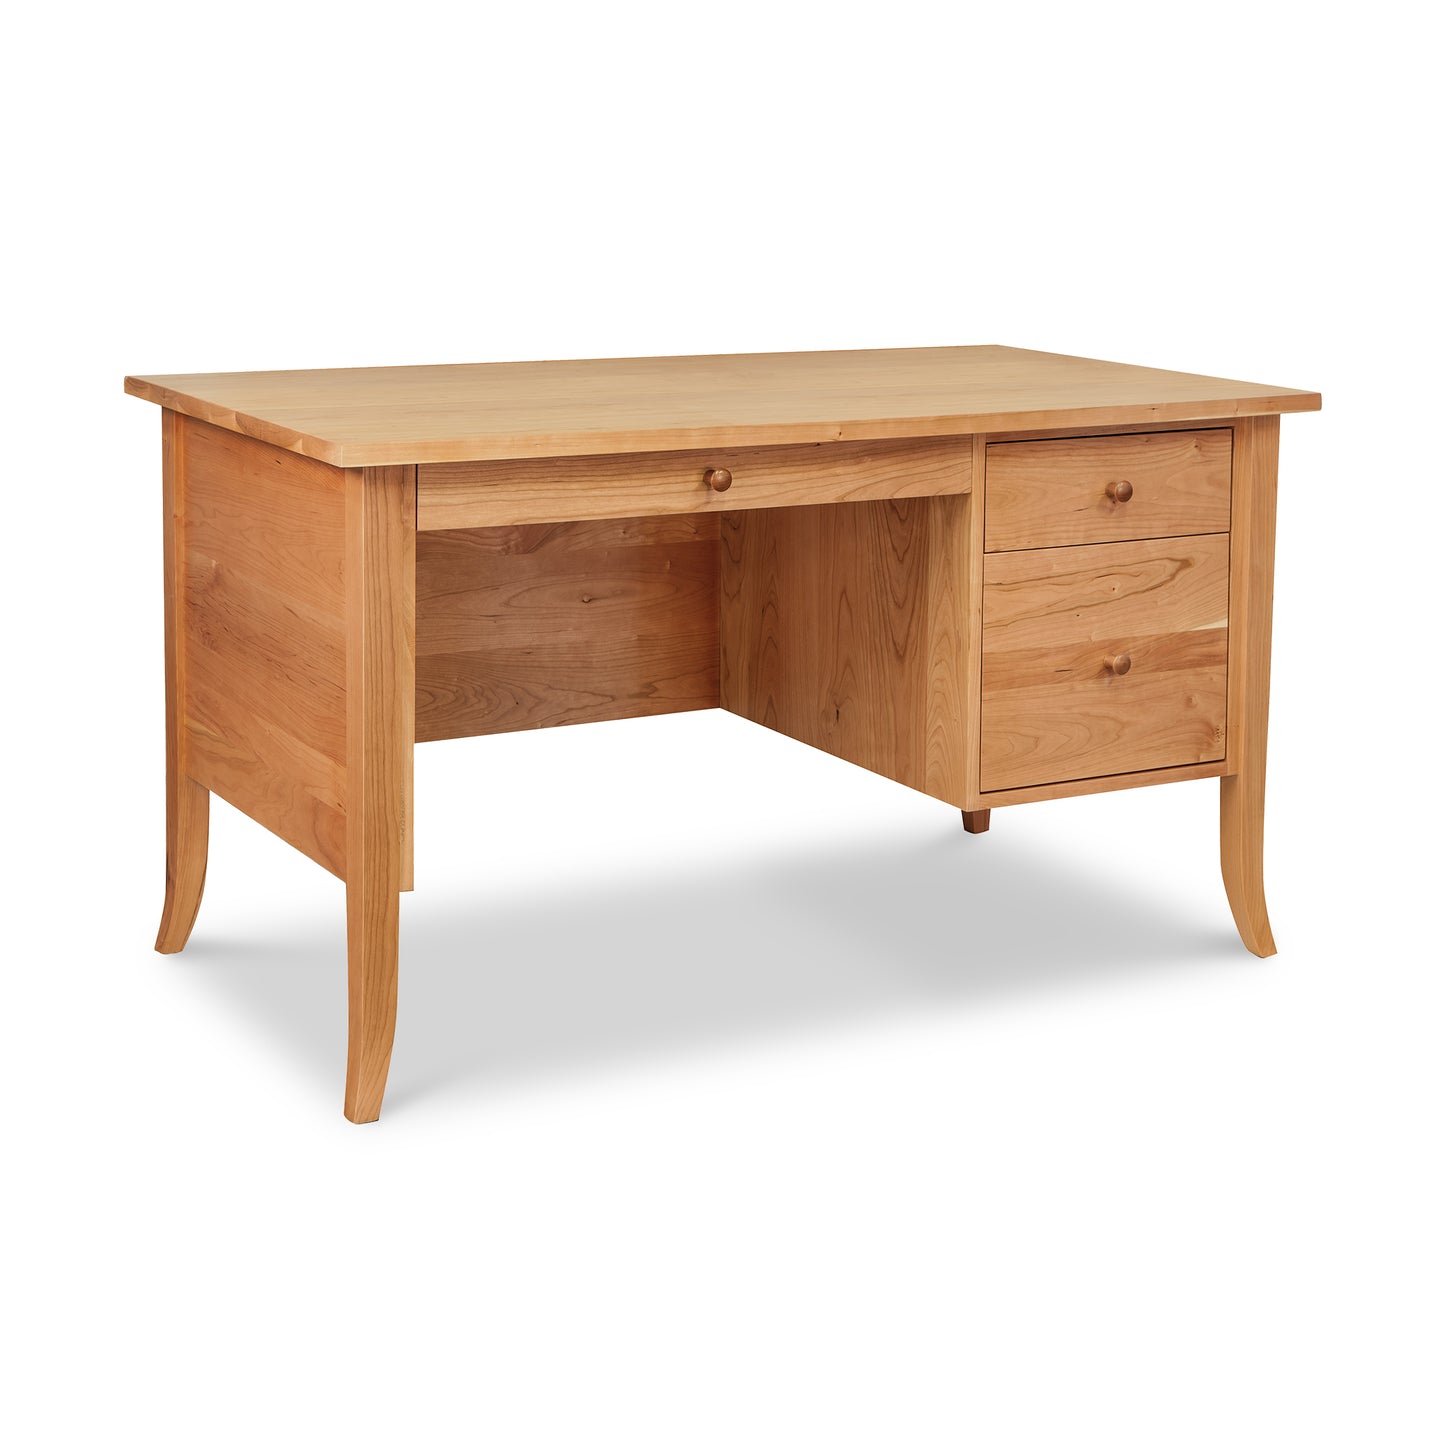 A Small Wood Flare Leg Executive Desk made by Lyndon Furniture with a built-in file cabinet and two drawers.